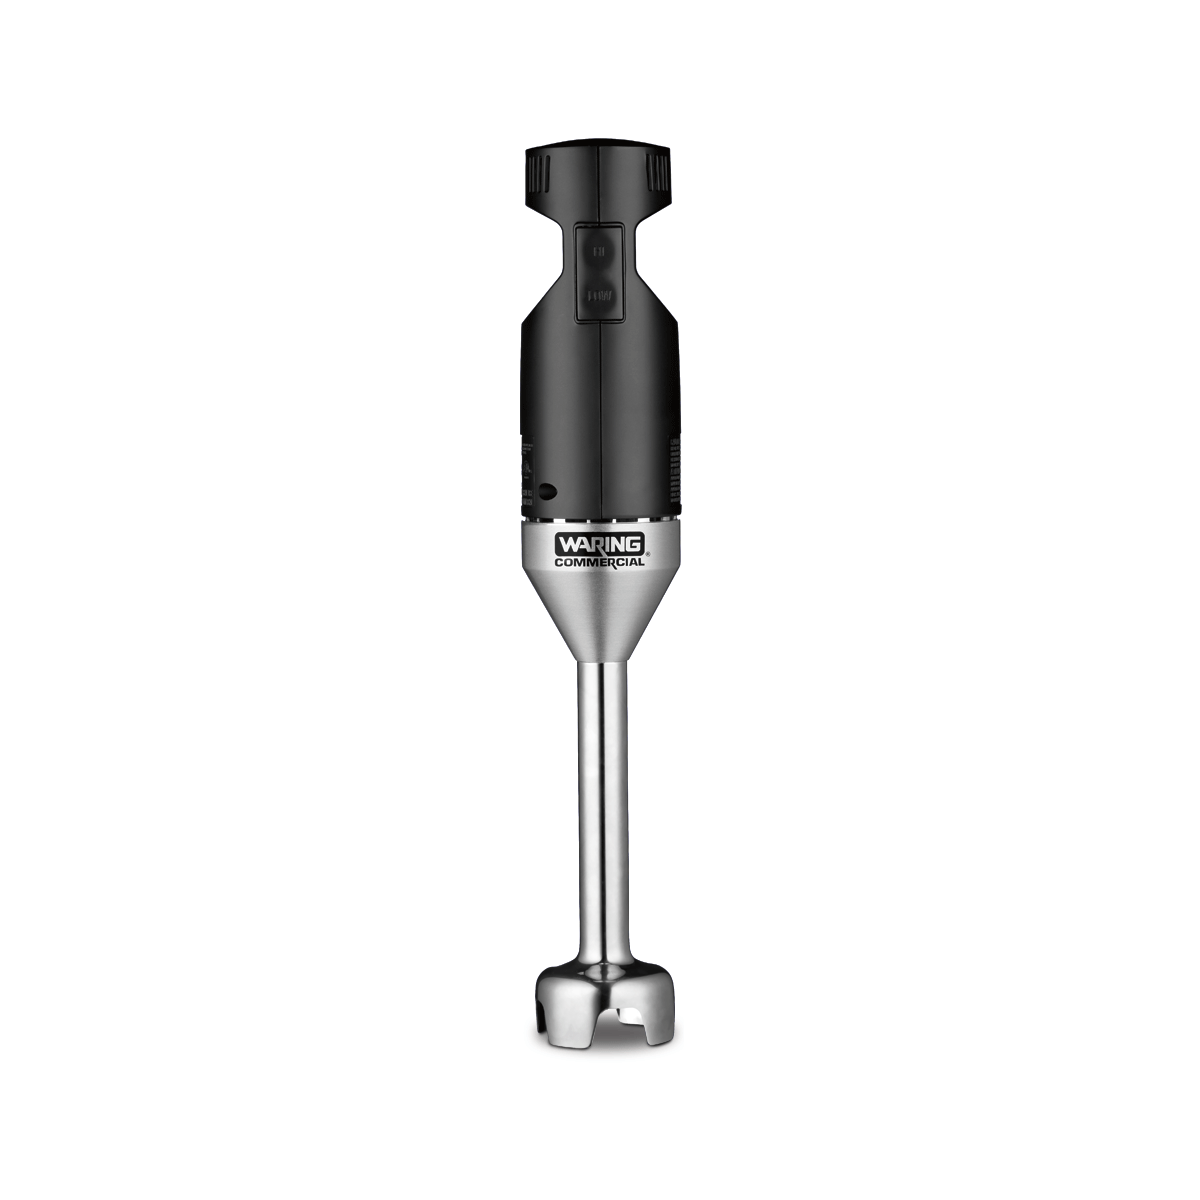 https://www.waringlab.com/assets/images/database/products/wsb33x-wsb33xe-wsb33xk-waring-lab-immersion-blender-main.png